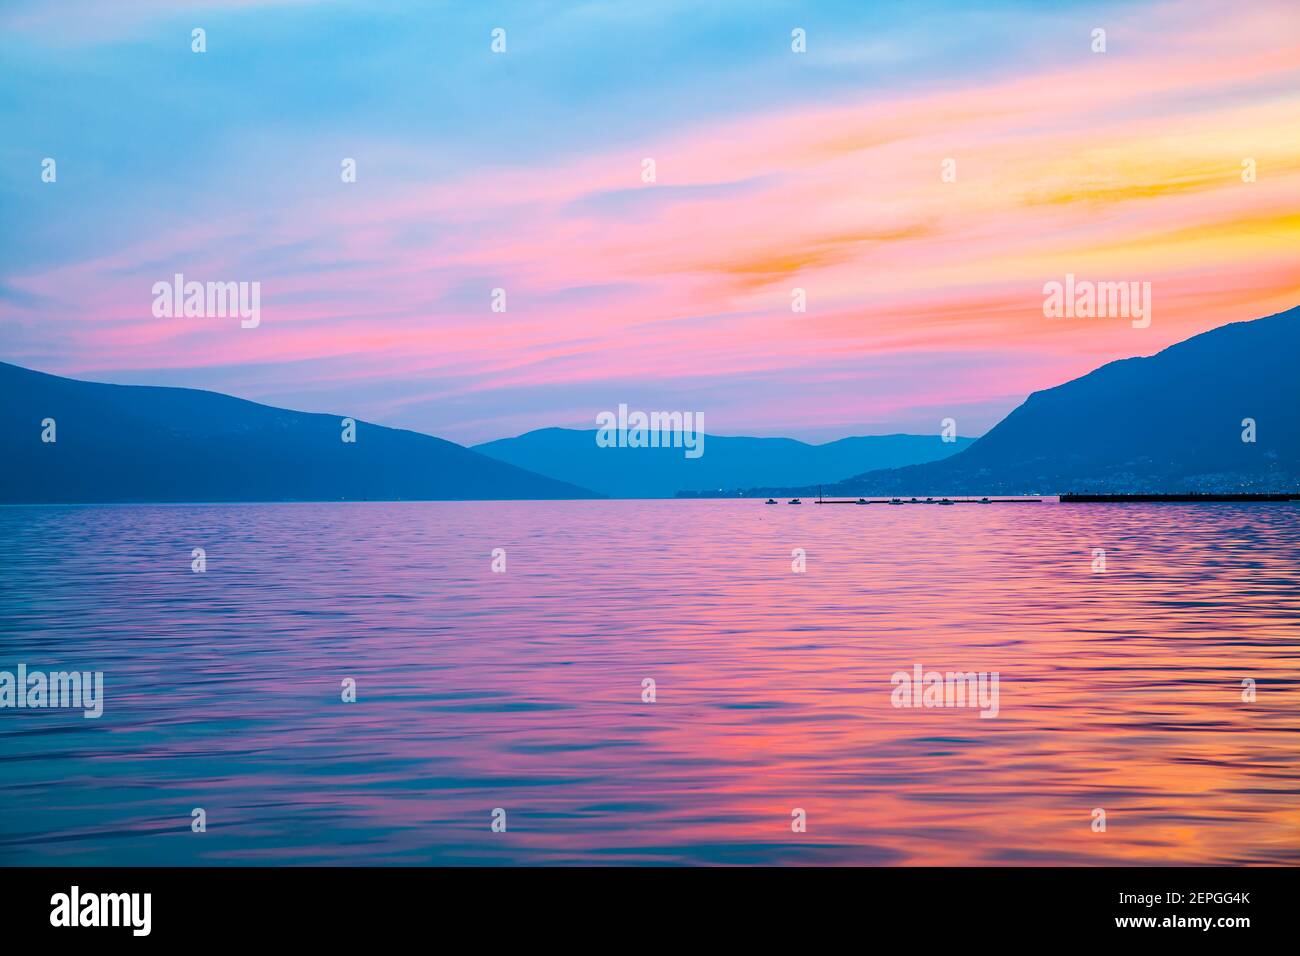 Landscape with The Bay of Kotor of the Adriatic Sea in Montenegro at dusk Stock Photo